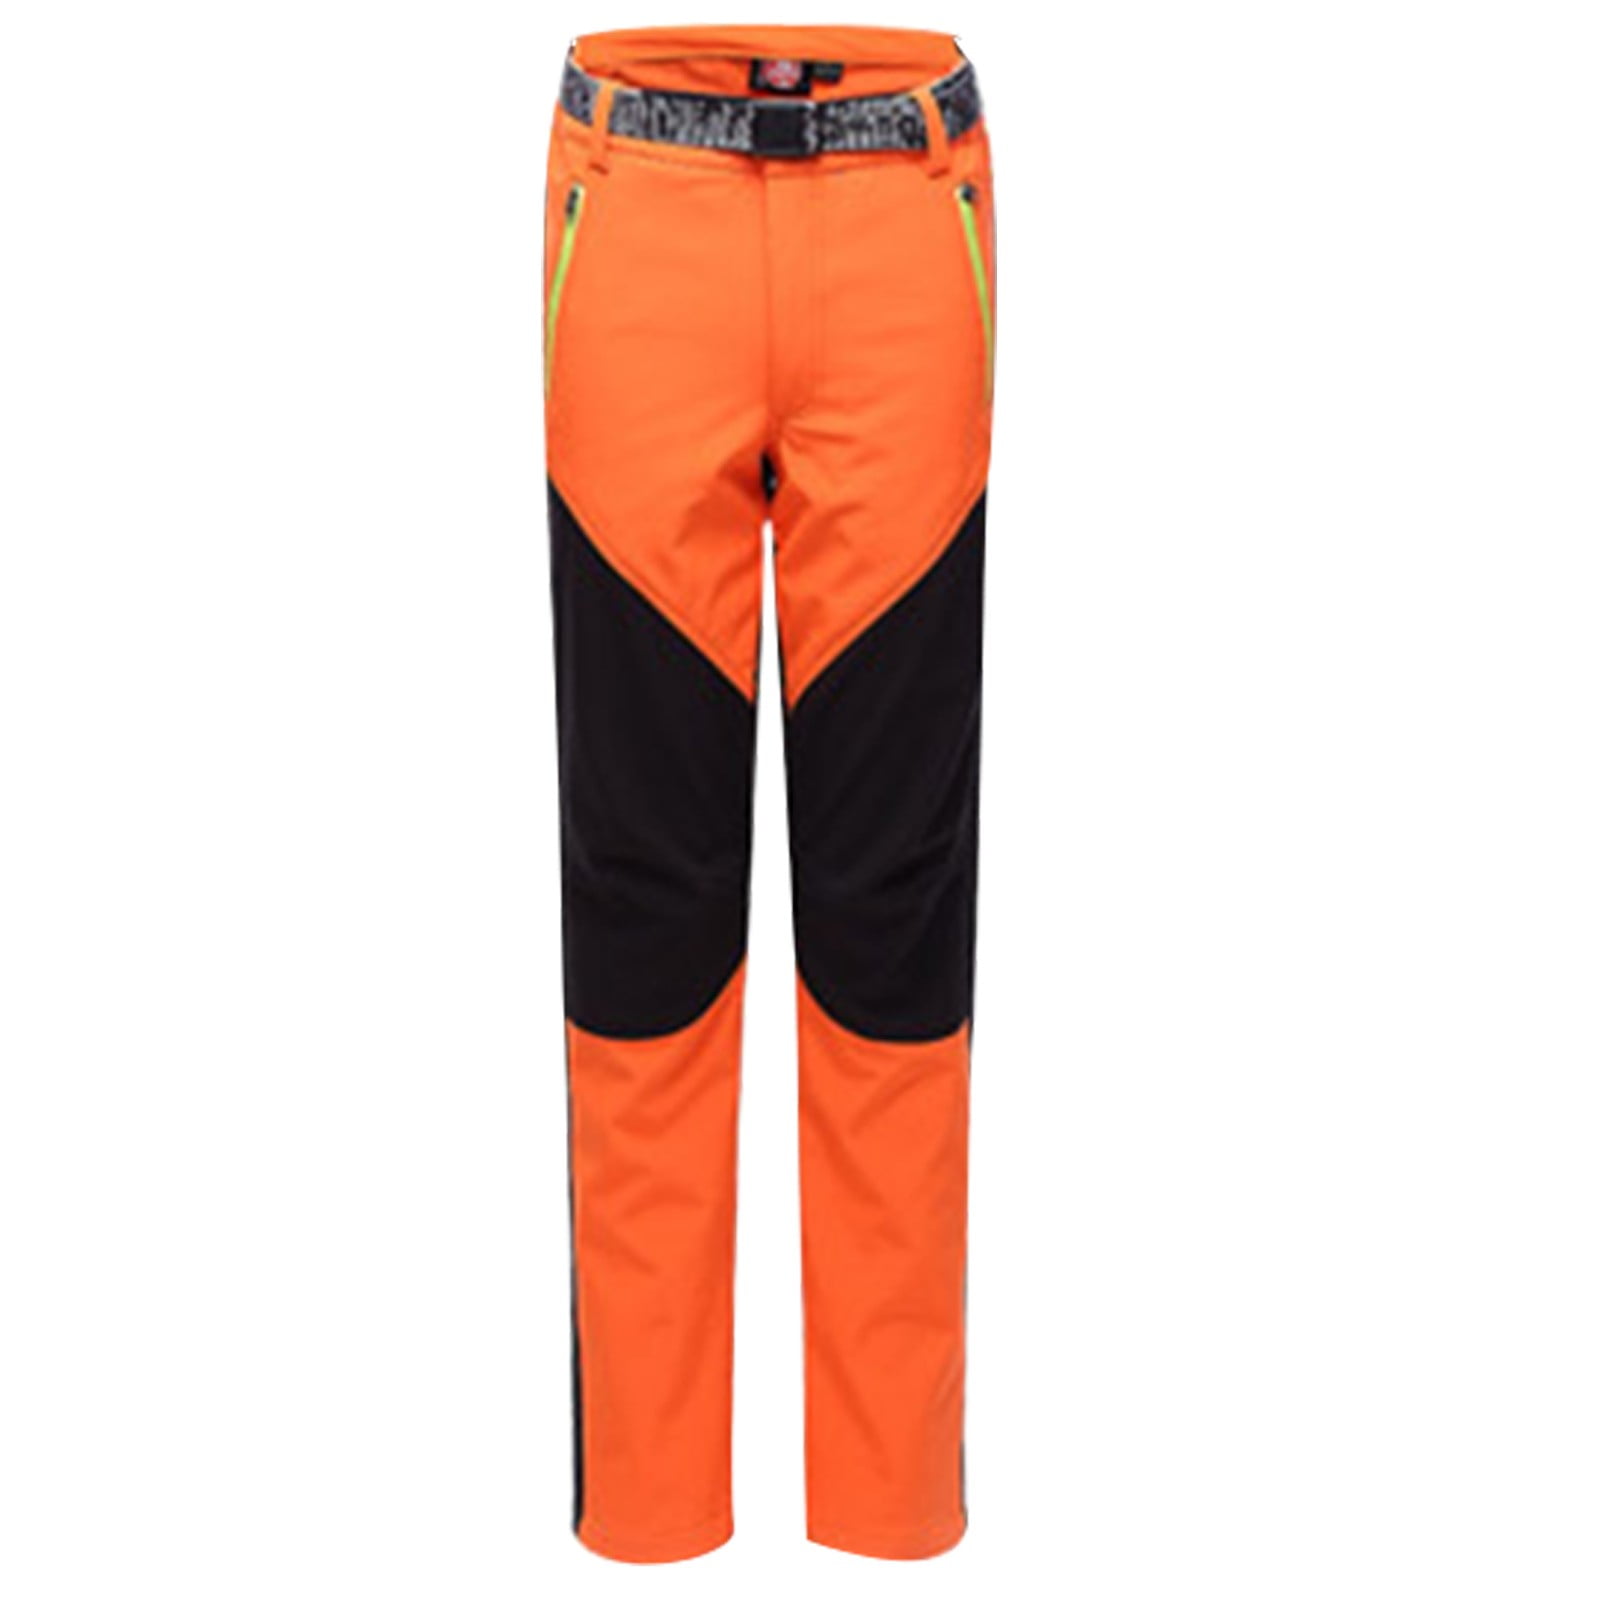 Pants Clearance Women'S Outdoor Mountaineering And Skiing Charge Stitching  Warm Pants Trousers Orange Xxl - Walmart.com